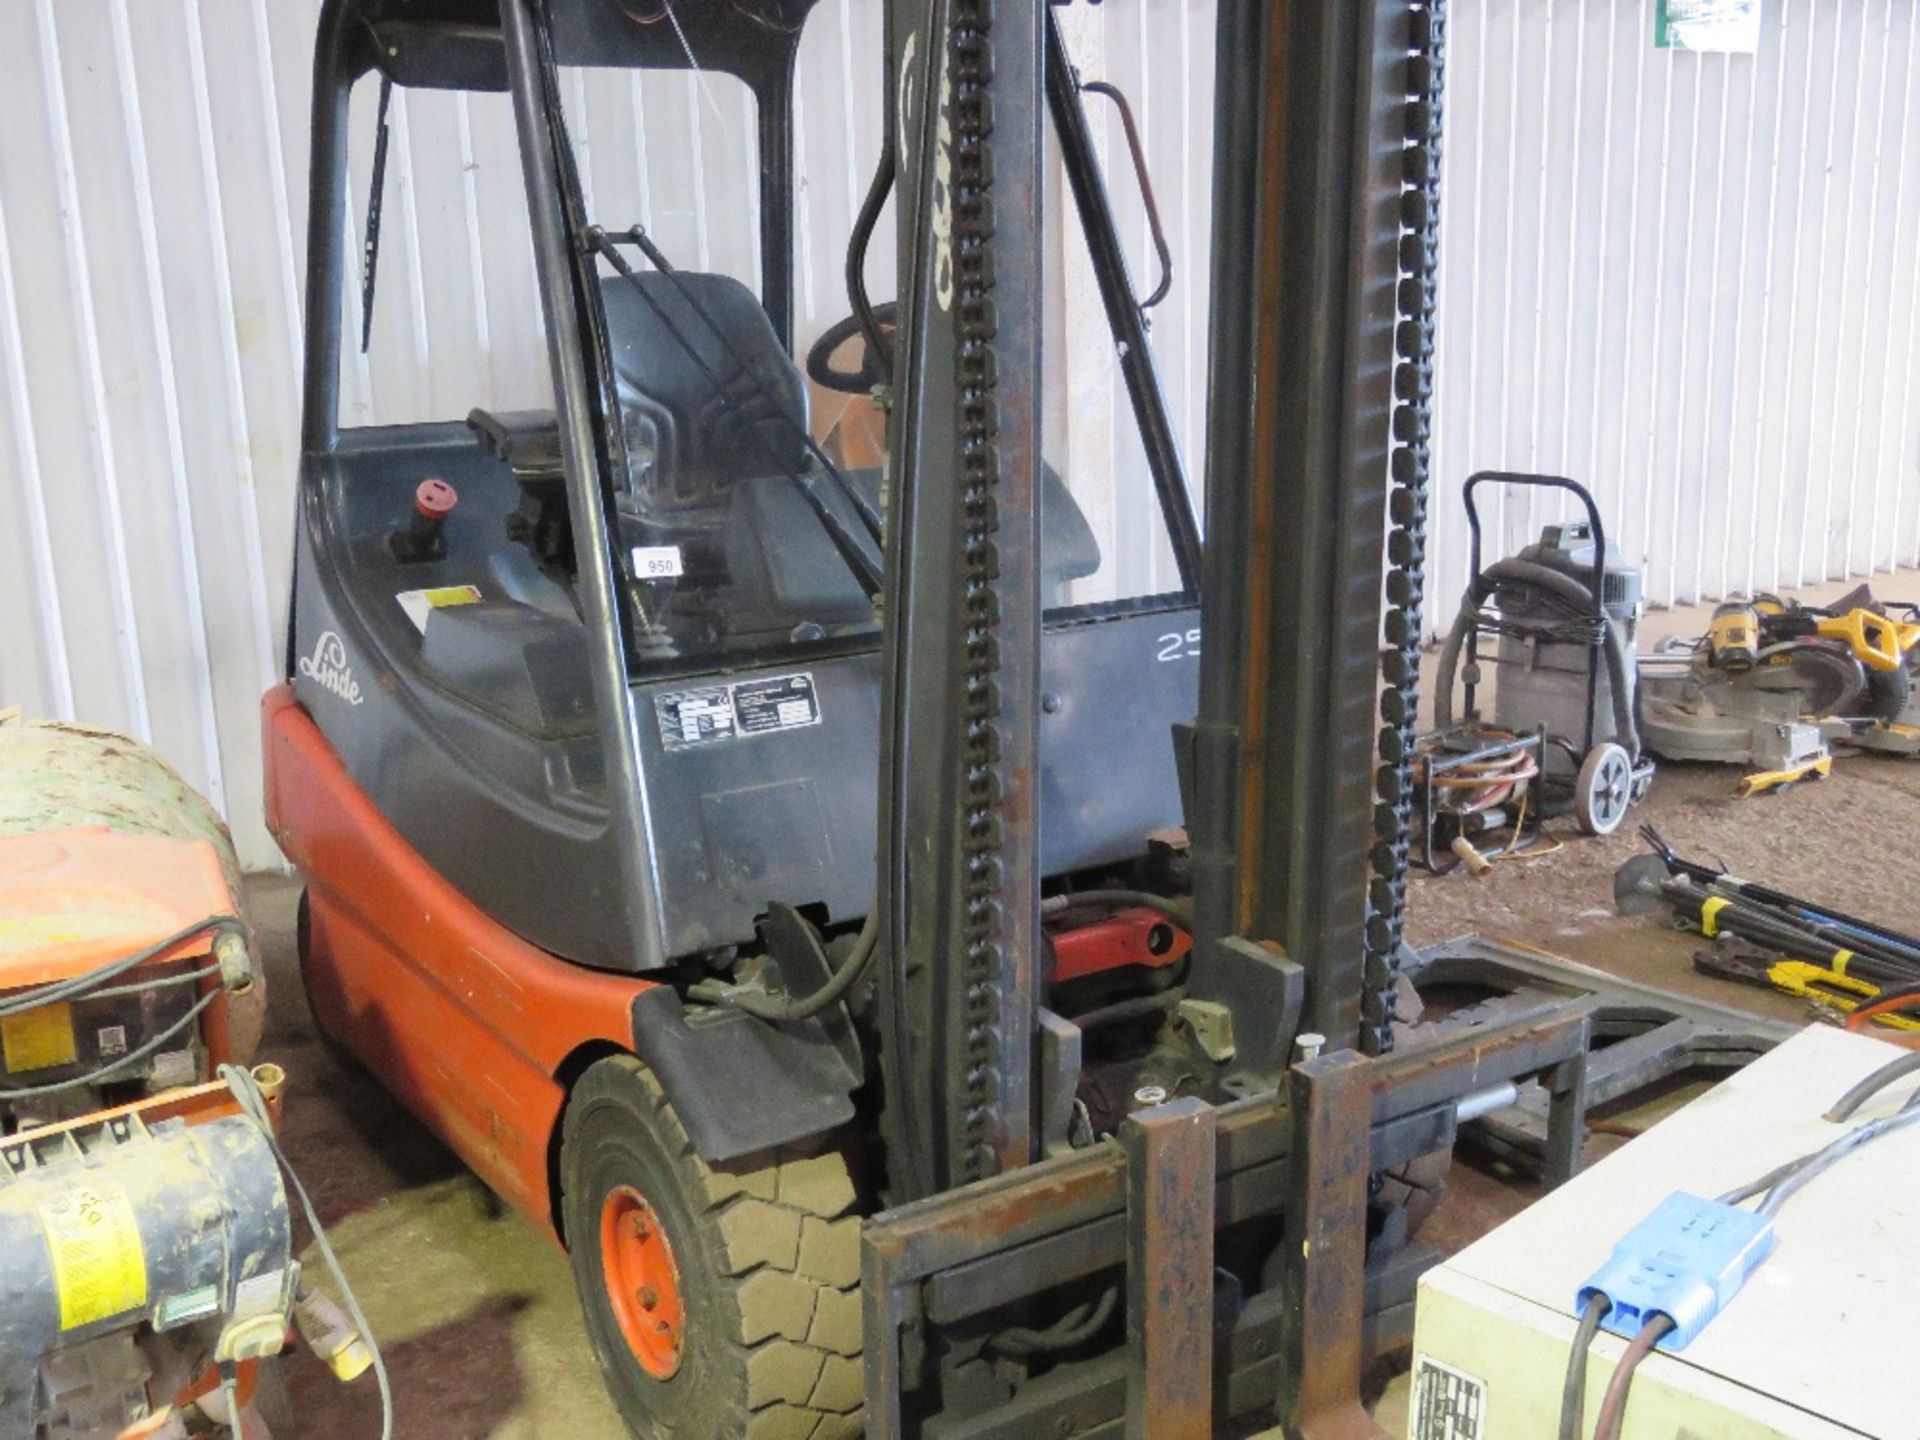 LINDE E25-02 BATTERY FORKLIFT WITH CHARGER. 10851 REC HOURS, YEAR 2000 BUILD. THIS LOT IS SOLD U